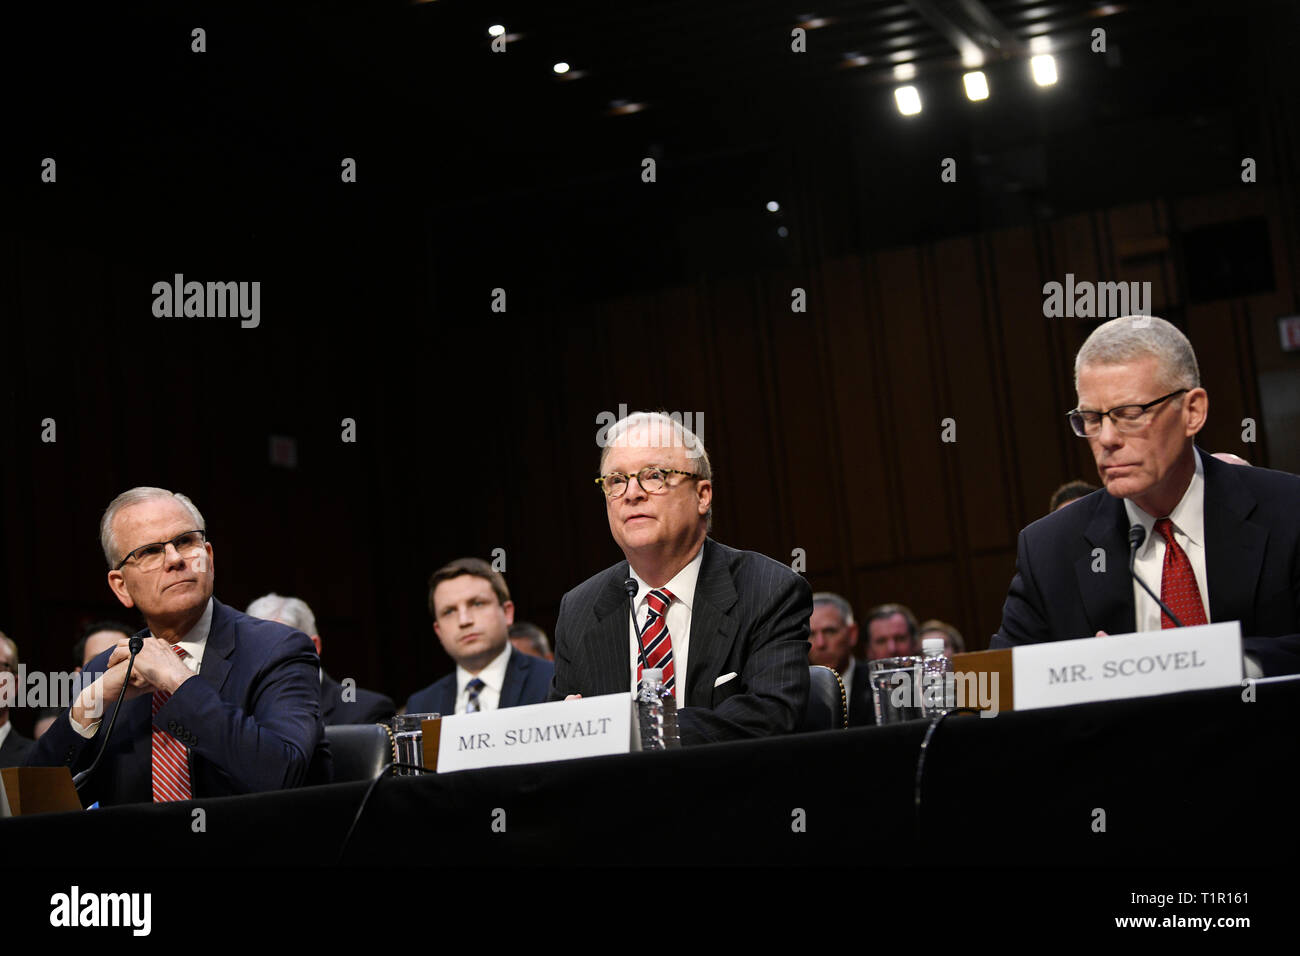 (190327) -- WASHINGTON, March 27, 2019 (Xinhua) -- Daniel Elwell (front, L), acting administrator of the U.S. Federal Aviation Administration (FAA), Robert Sumwalt (front, C), Chairman of the U.S. National Transportation Safety Board (NTSB), and Calvin Scovel (front, R), the U.S. Transportation Department's inspector general, attend a Senate Commerce Committee hearing on airline safety in Washington, DC, the United States, on March 27, 2019. The U.S. Federal Aviation Administration (FAA) on Wednesday vowed to revamp its air safety oversight after two deadly crashes involving Boeing 737 Max je Stock Photo